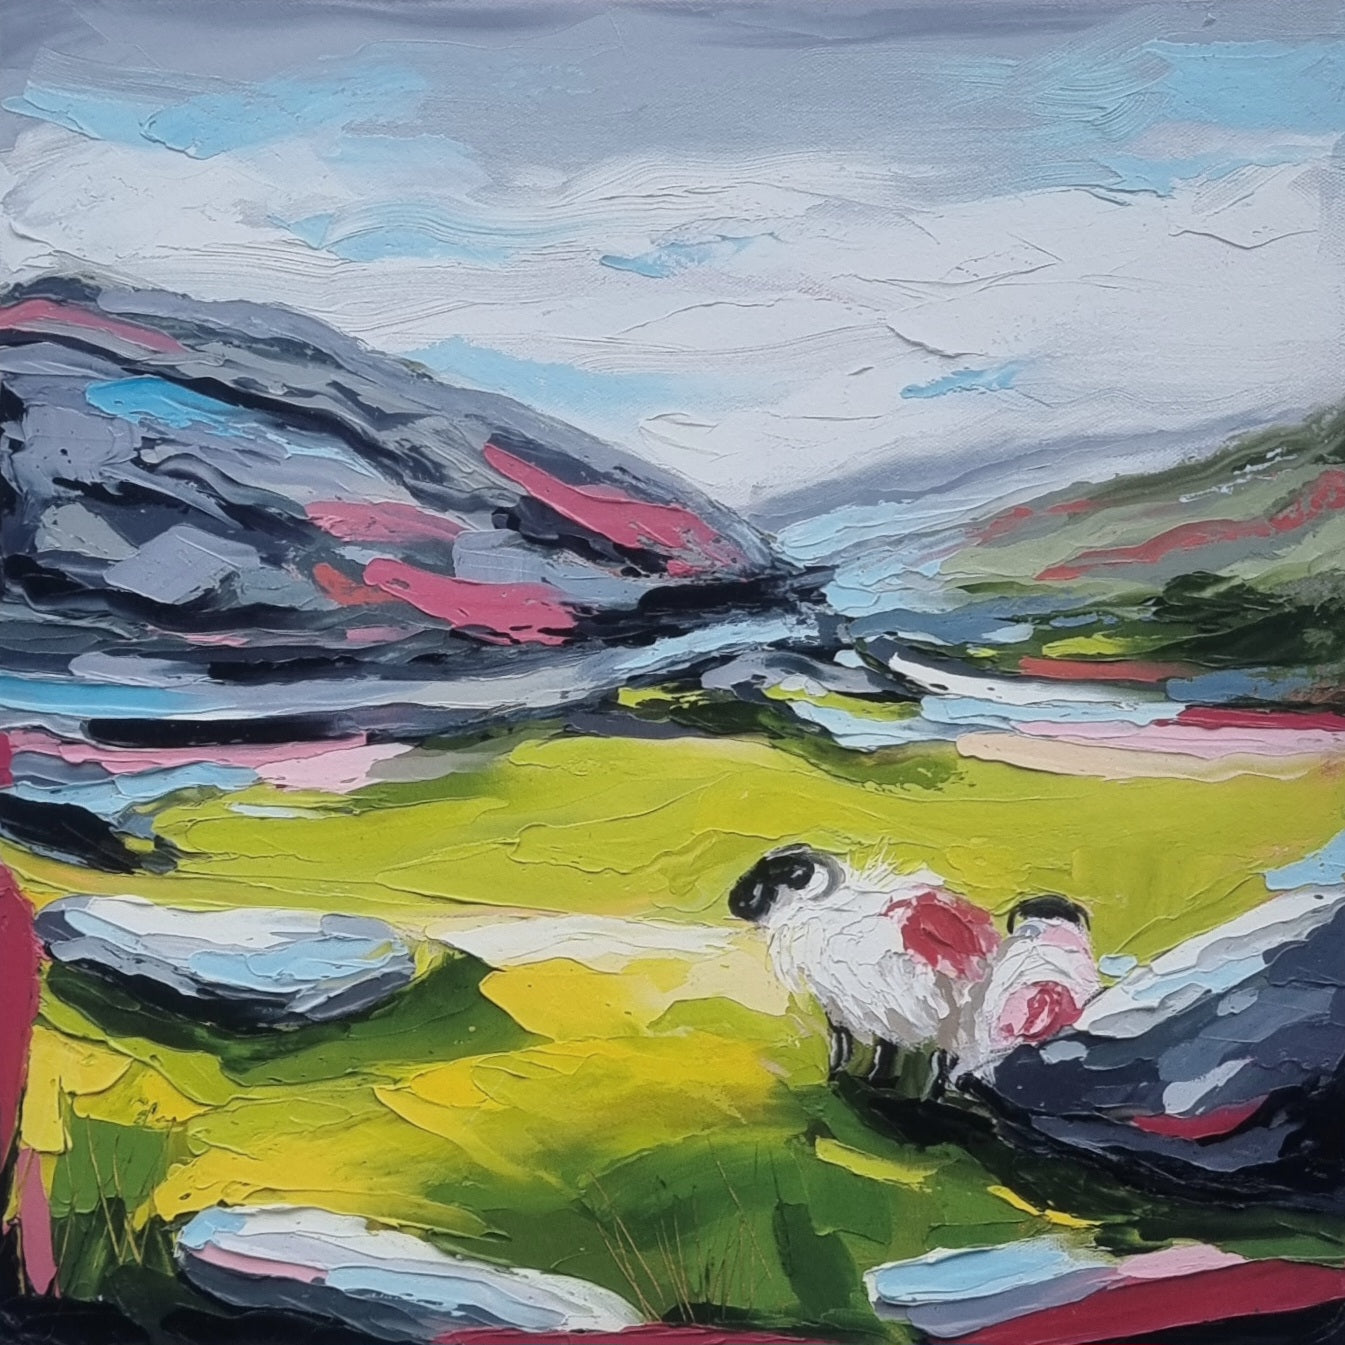 Summer Days in Kerry vibrant print